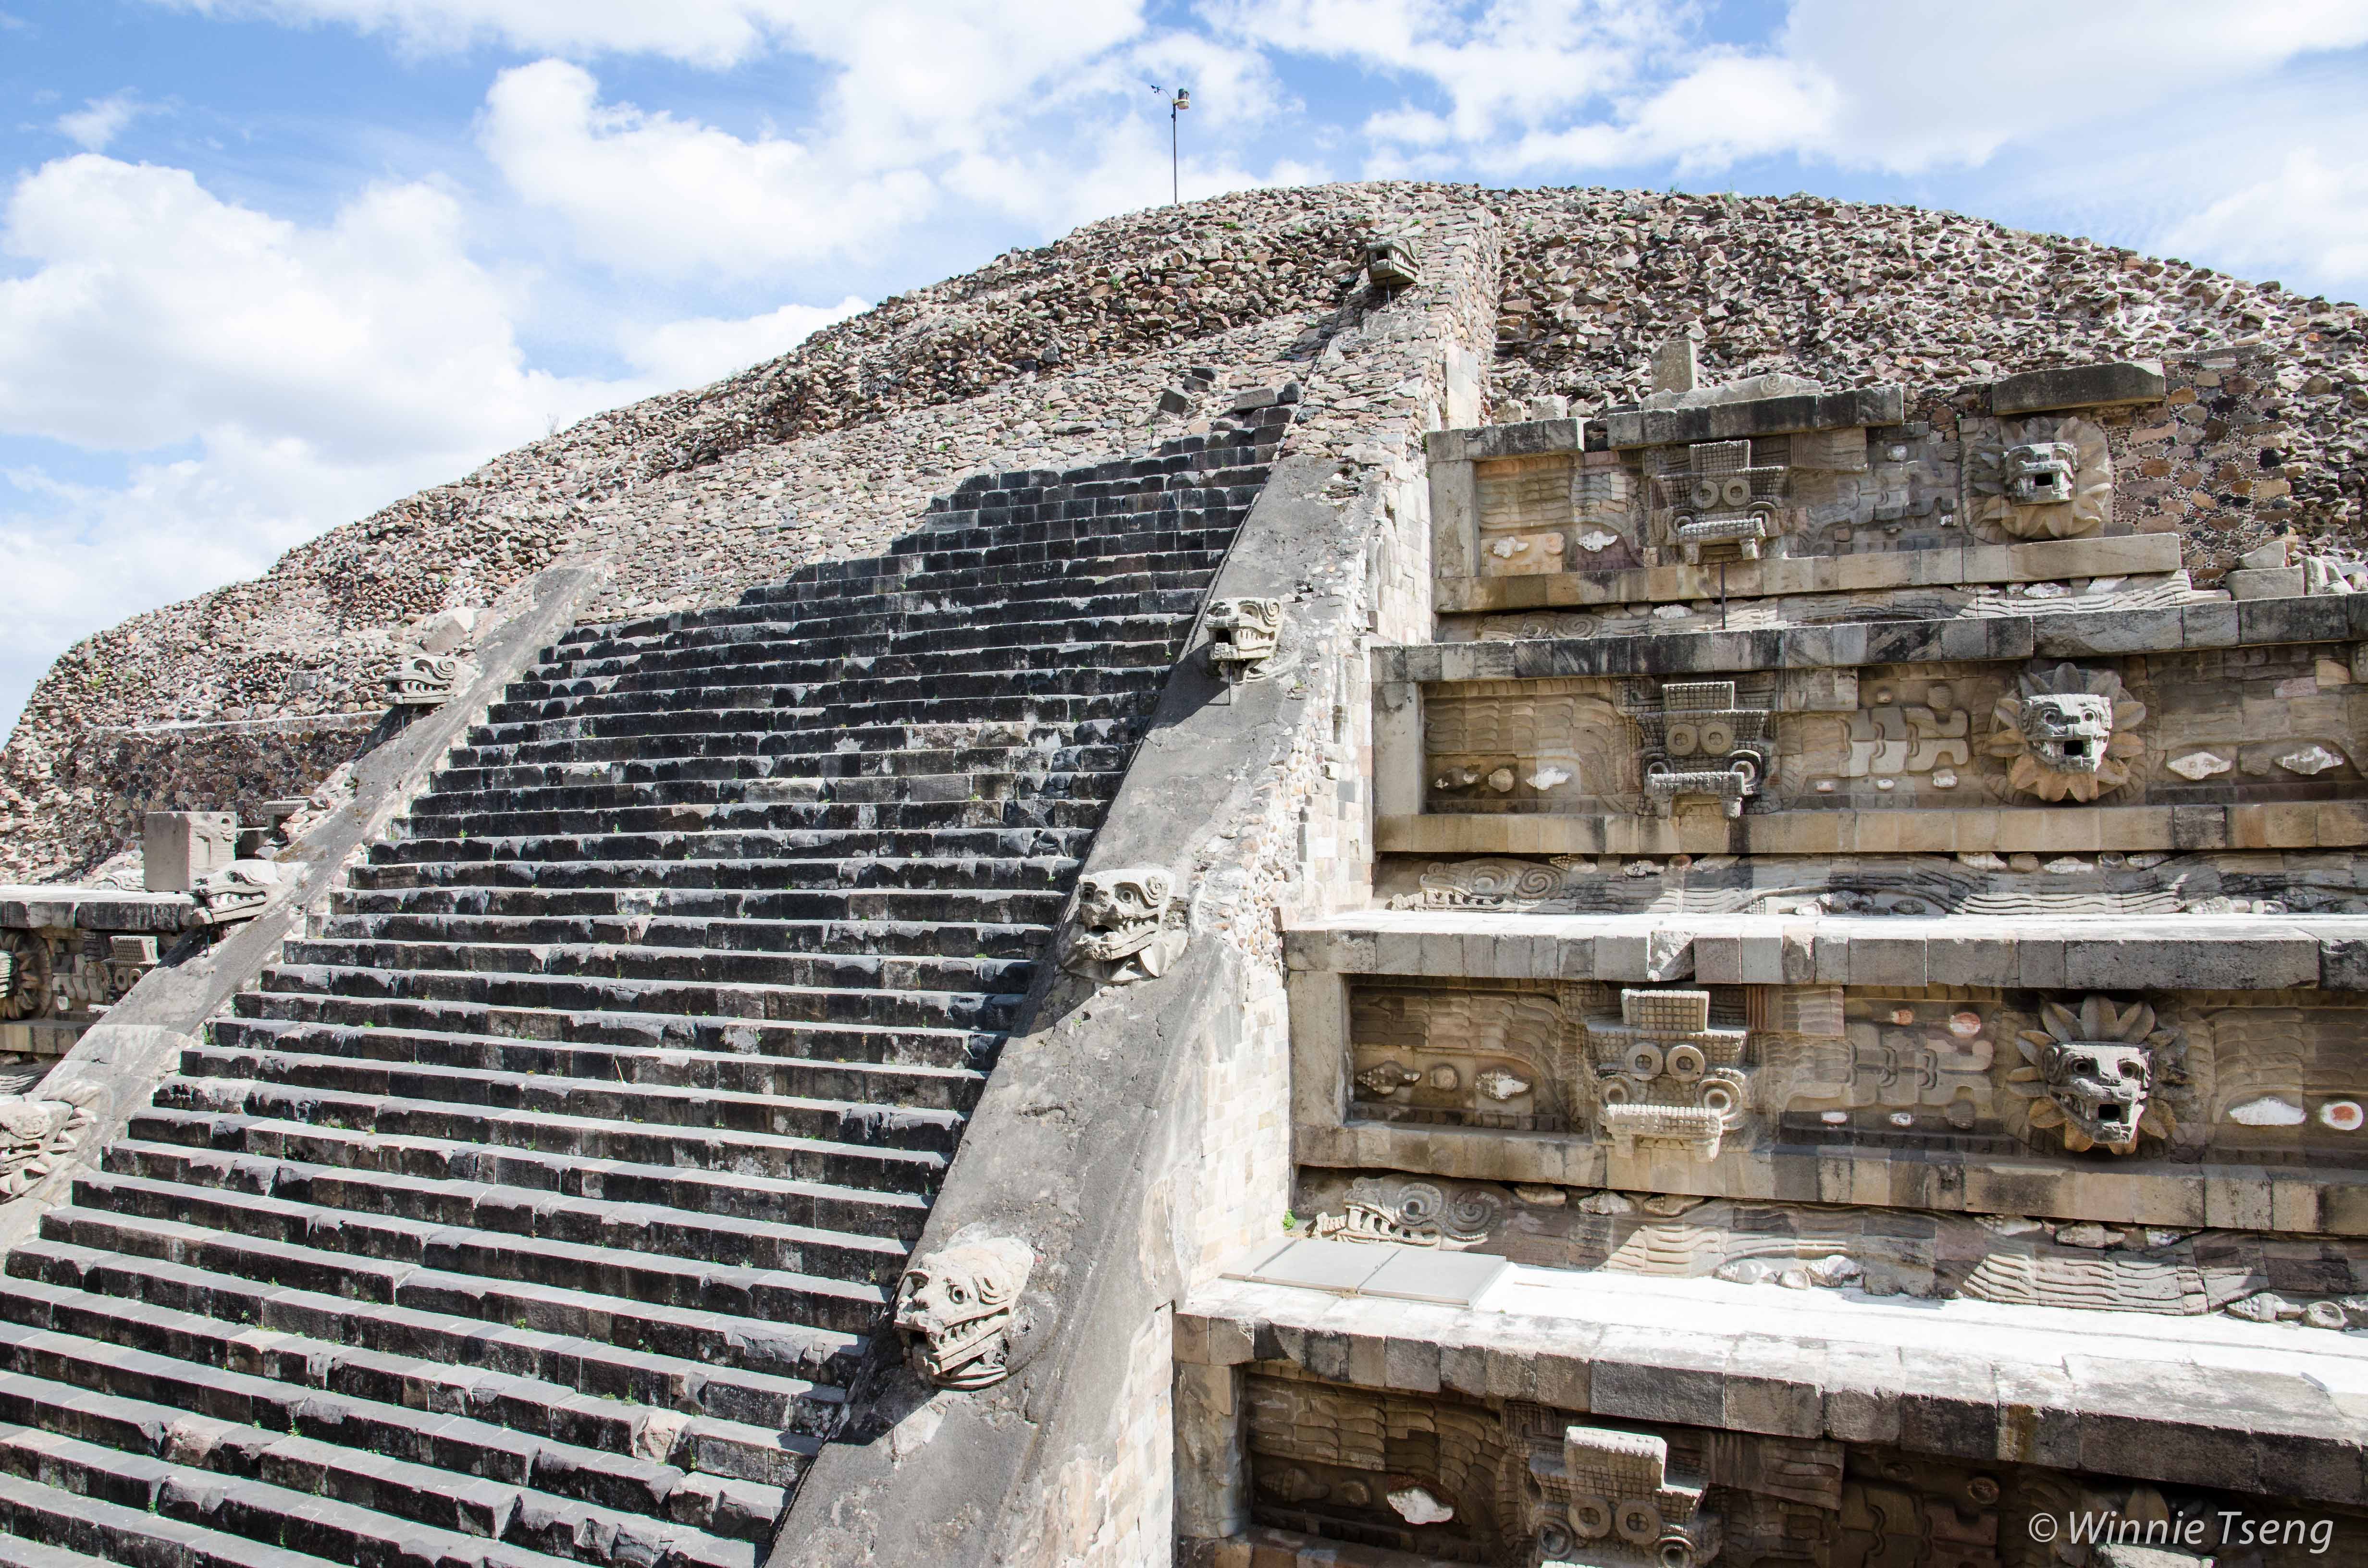 Temple of the Feathered Serpent